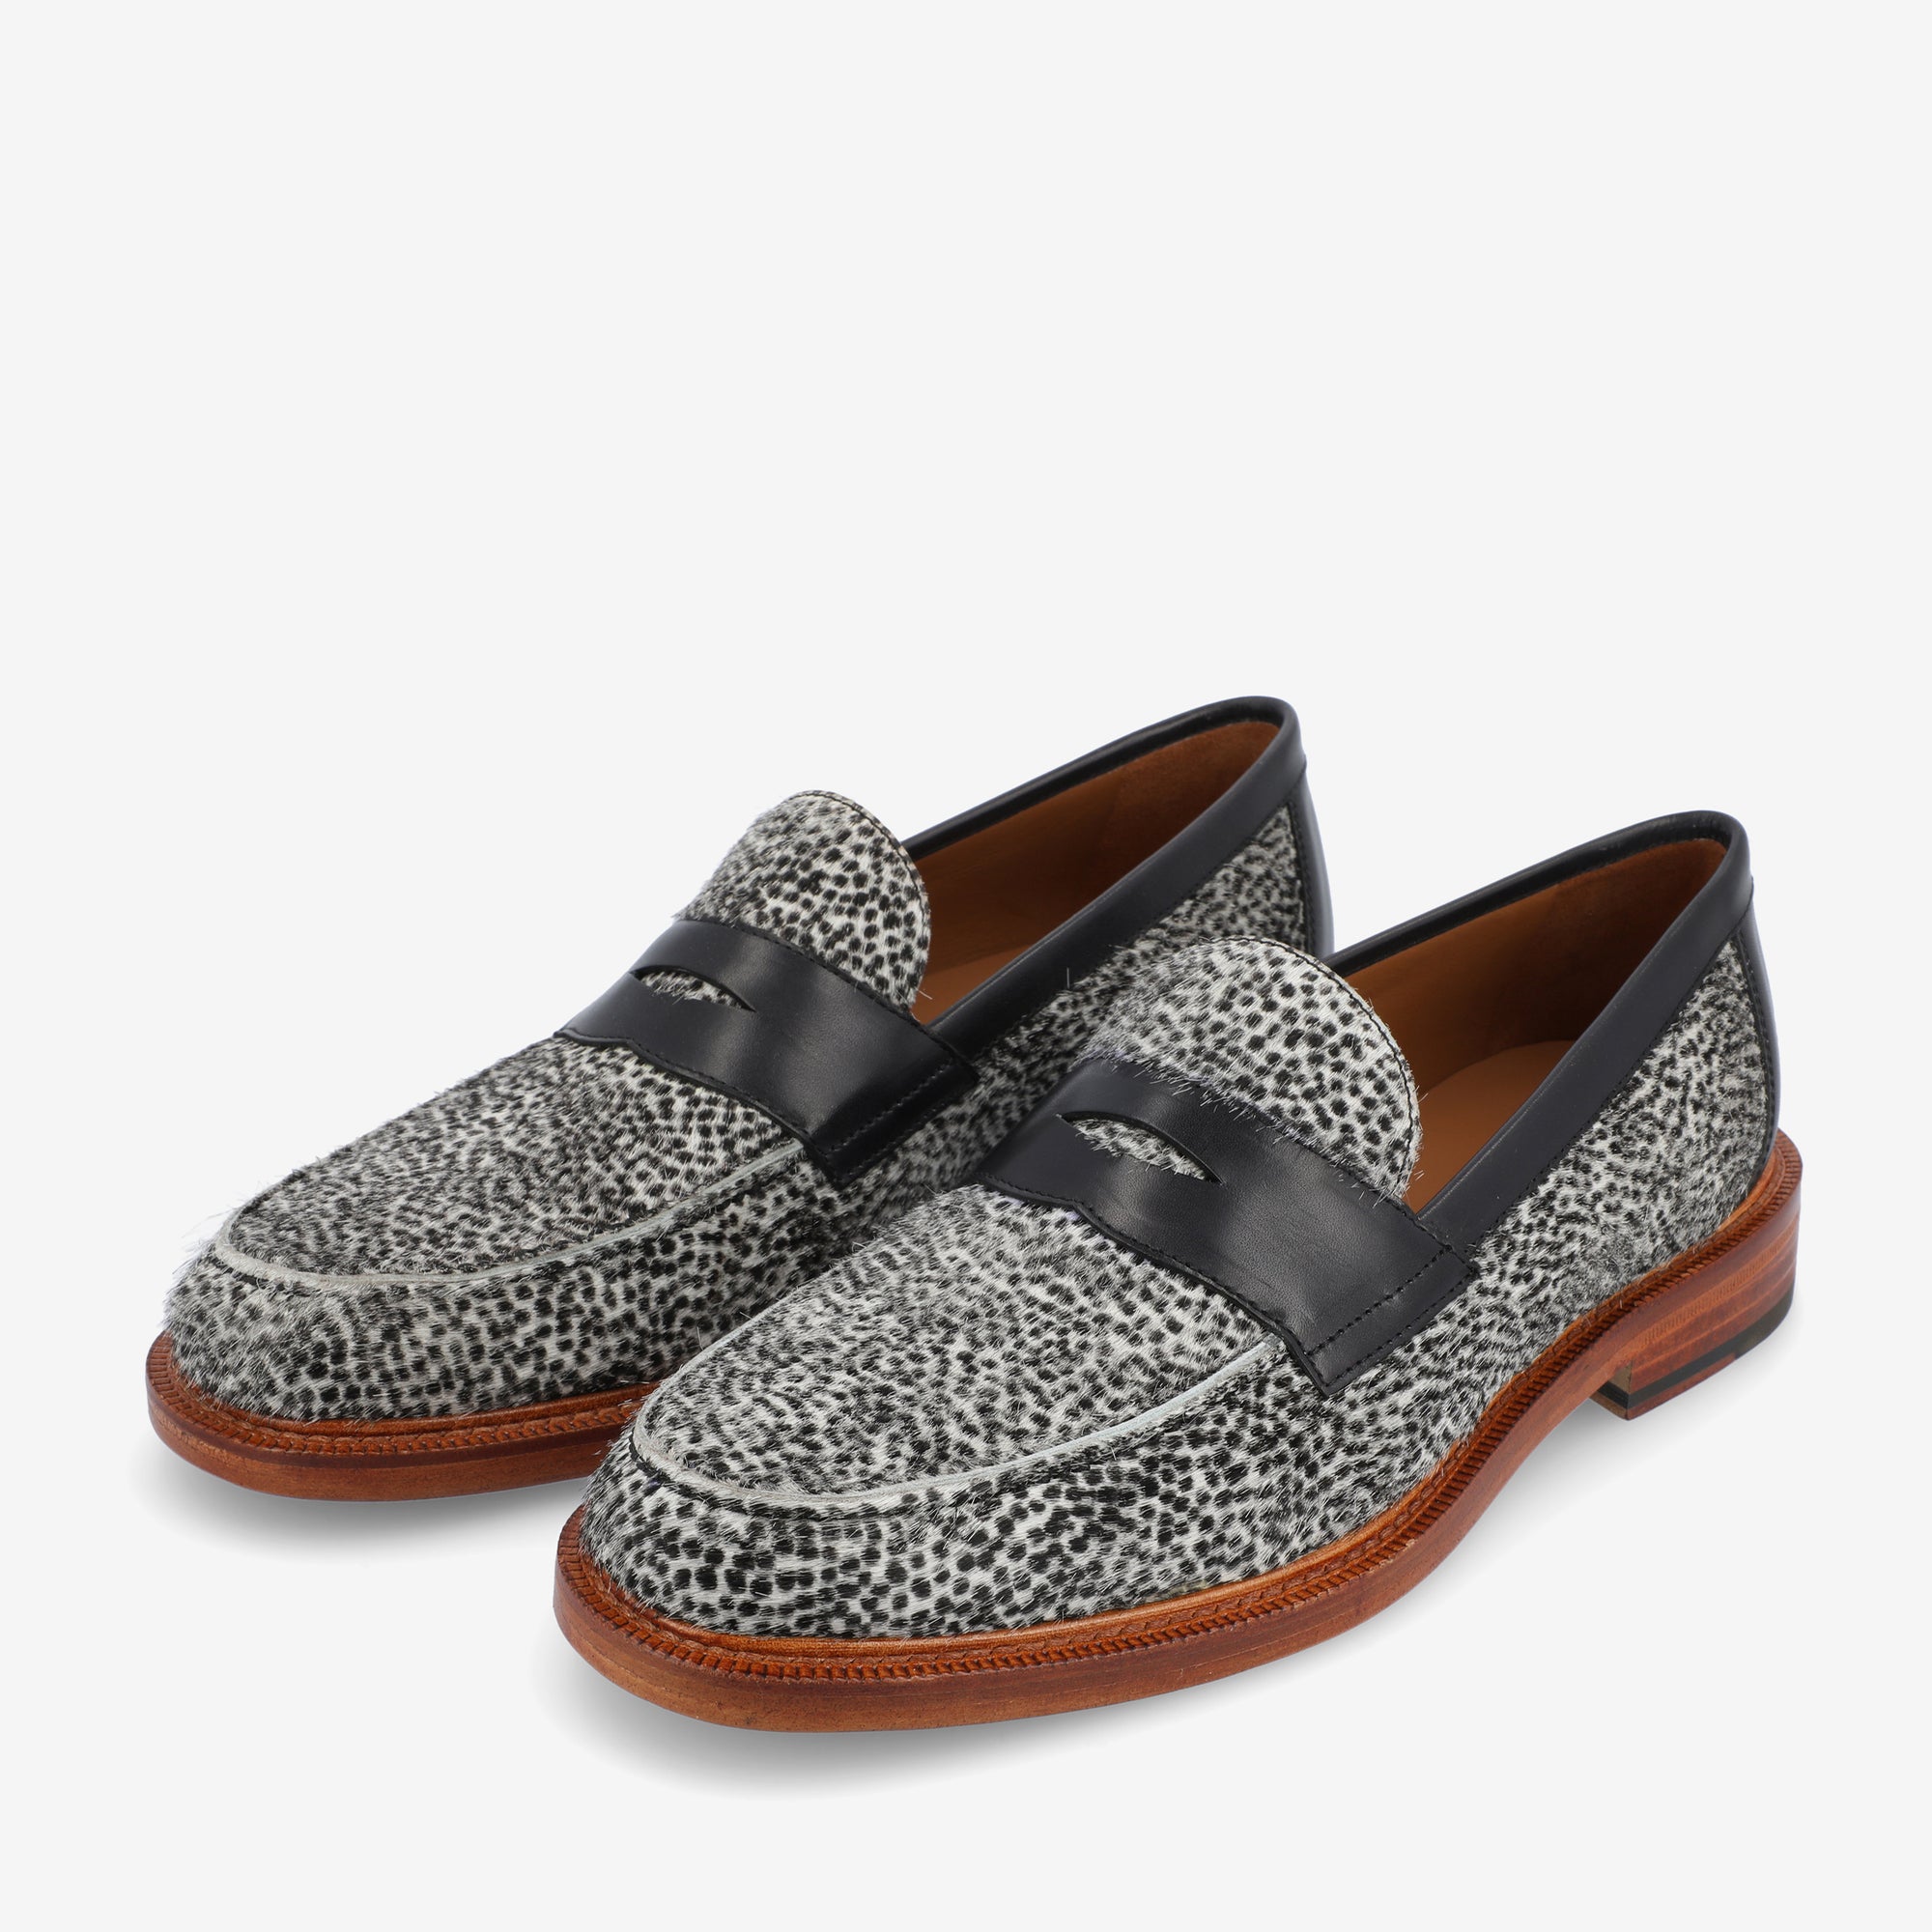 The Fitz Loafer in Rainclouds (Last Chance, Final Sale)